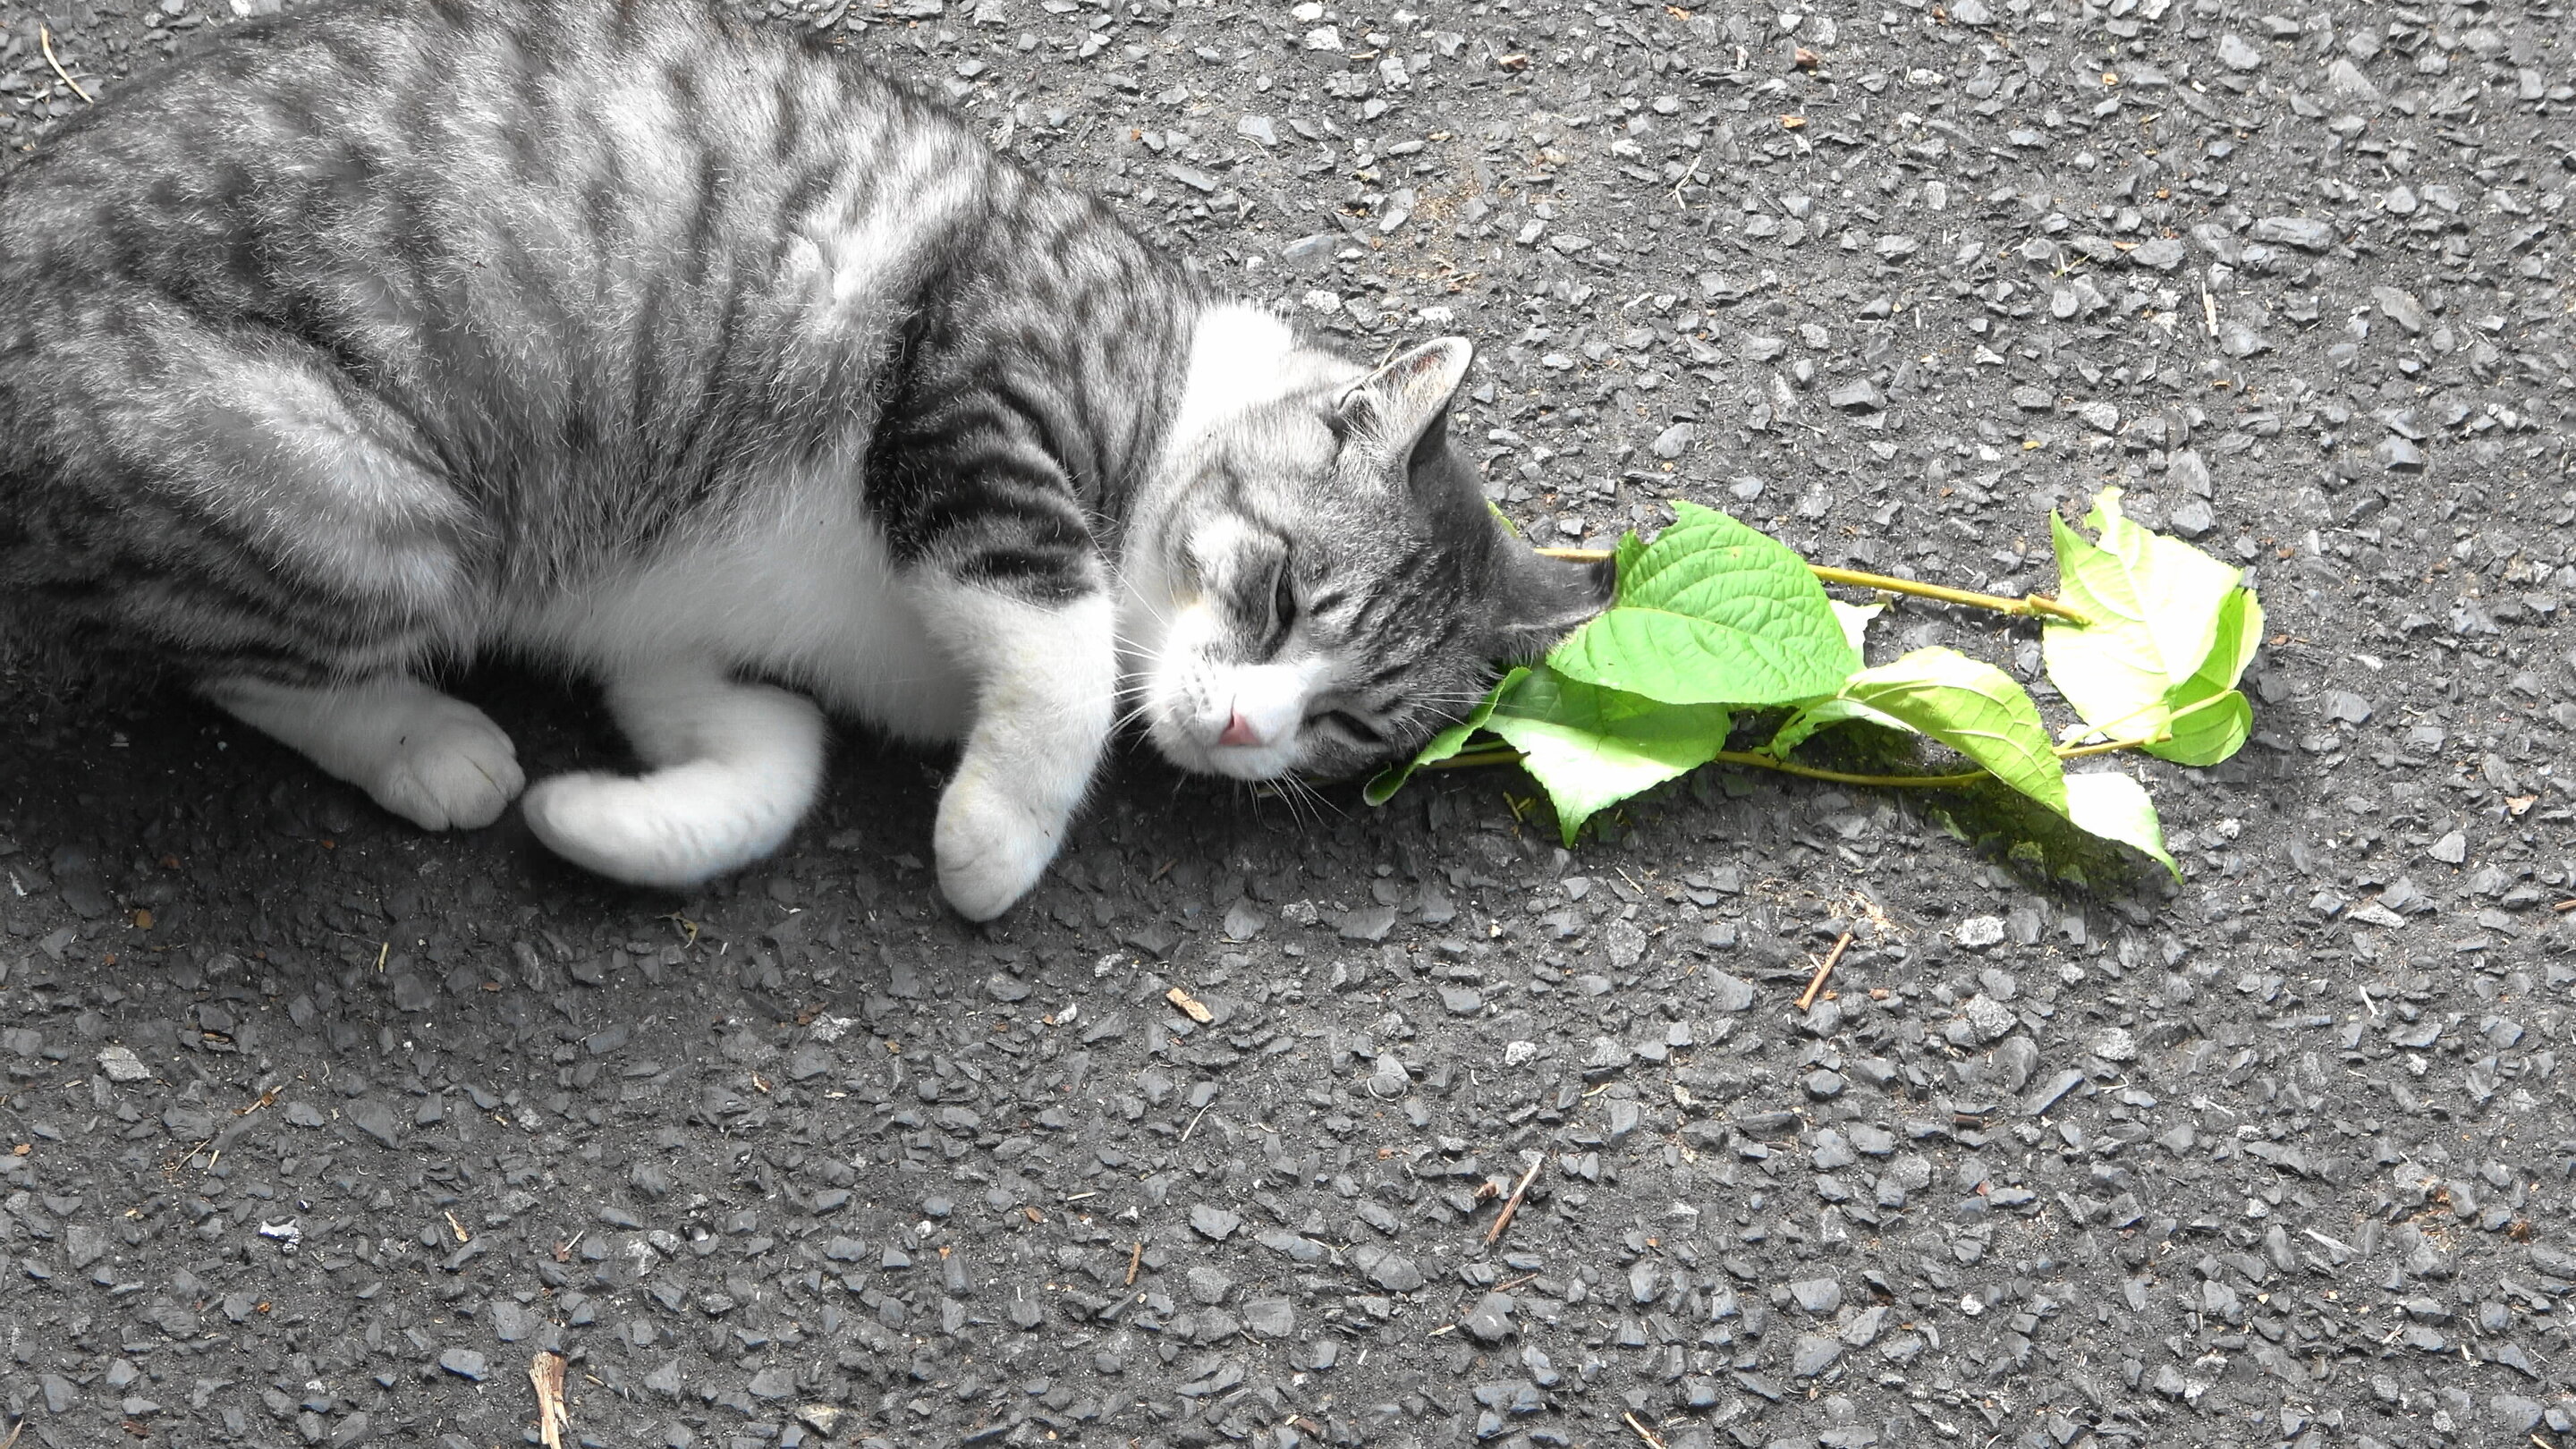 Catnip leaves kittens cat groovy, prevents mosquitoes: study